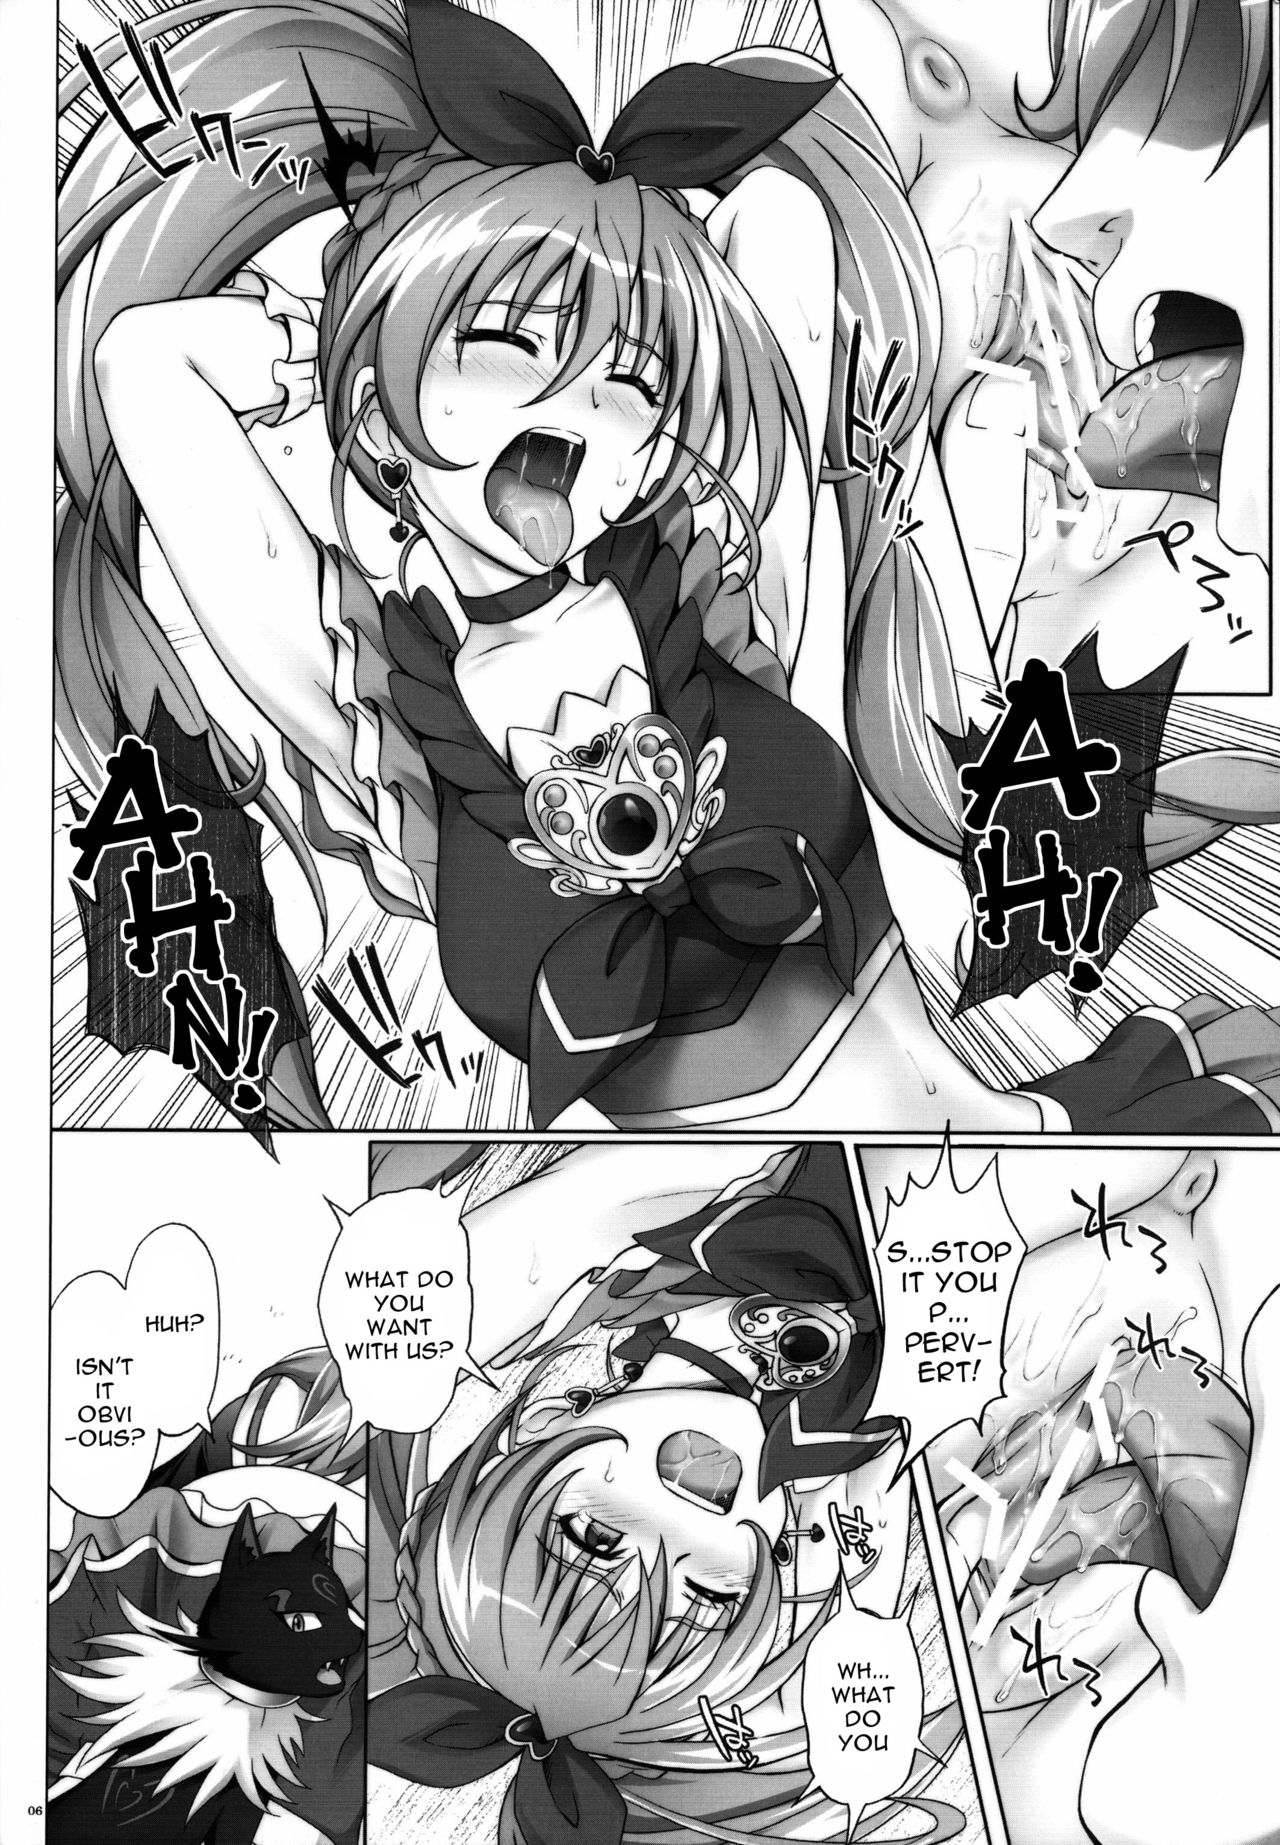 [Cyclone (Izumi, Reizei)] H-01 Melooo (Suite Precure) [eng] page 5 full